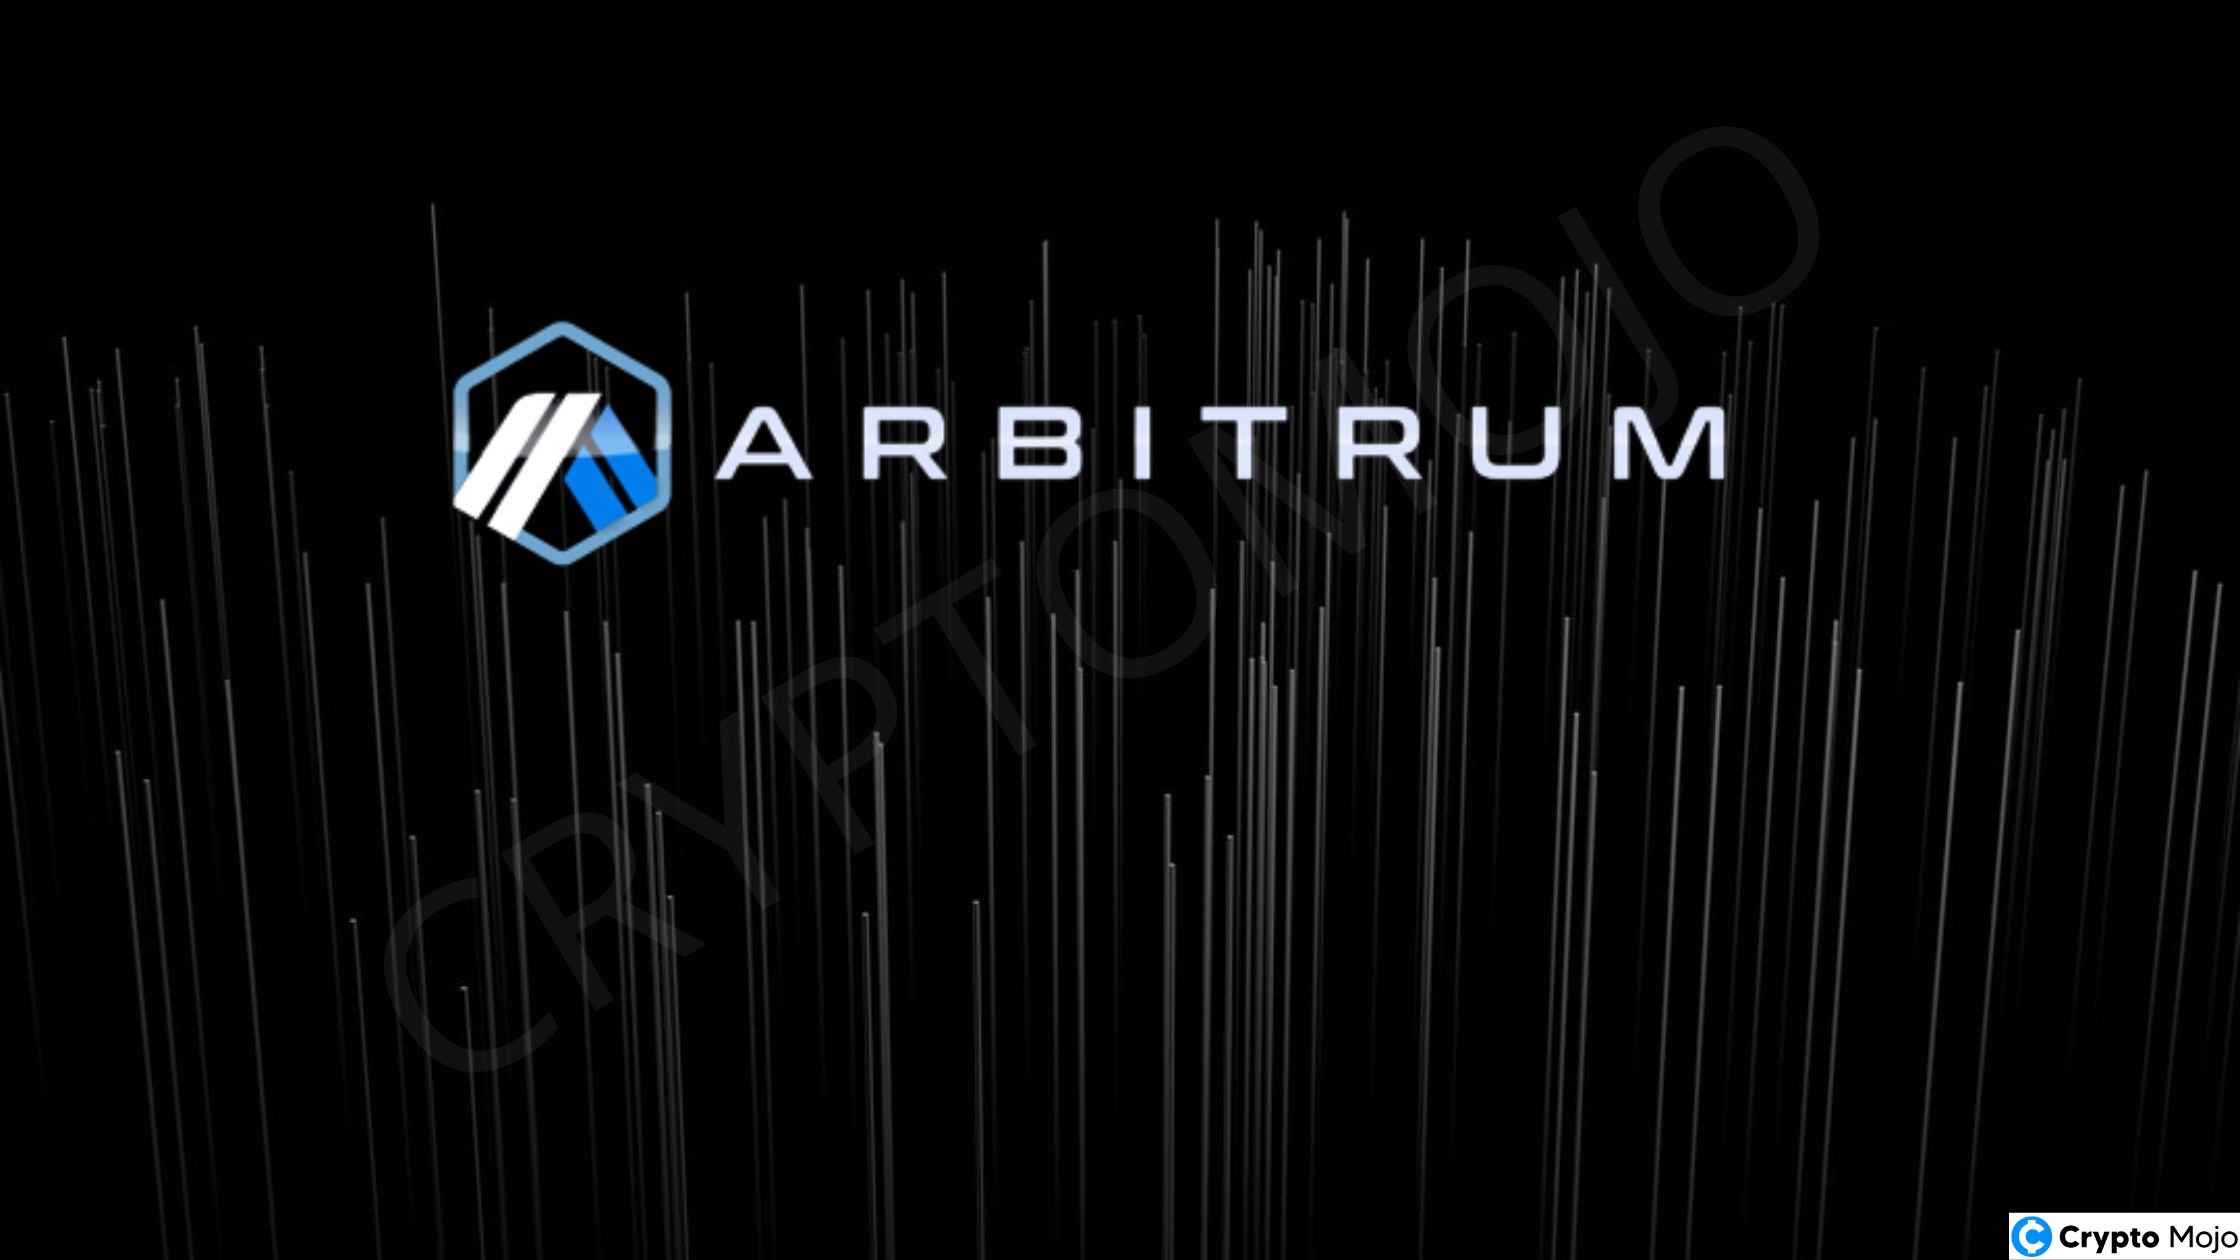 Arbitrum, An Ethereum Layer 2 project, Has Launched Nova Chain And Links With Reddit!